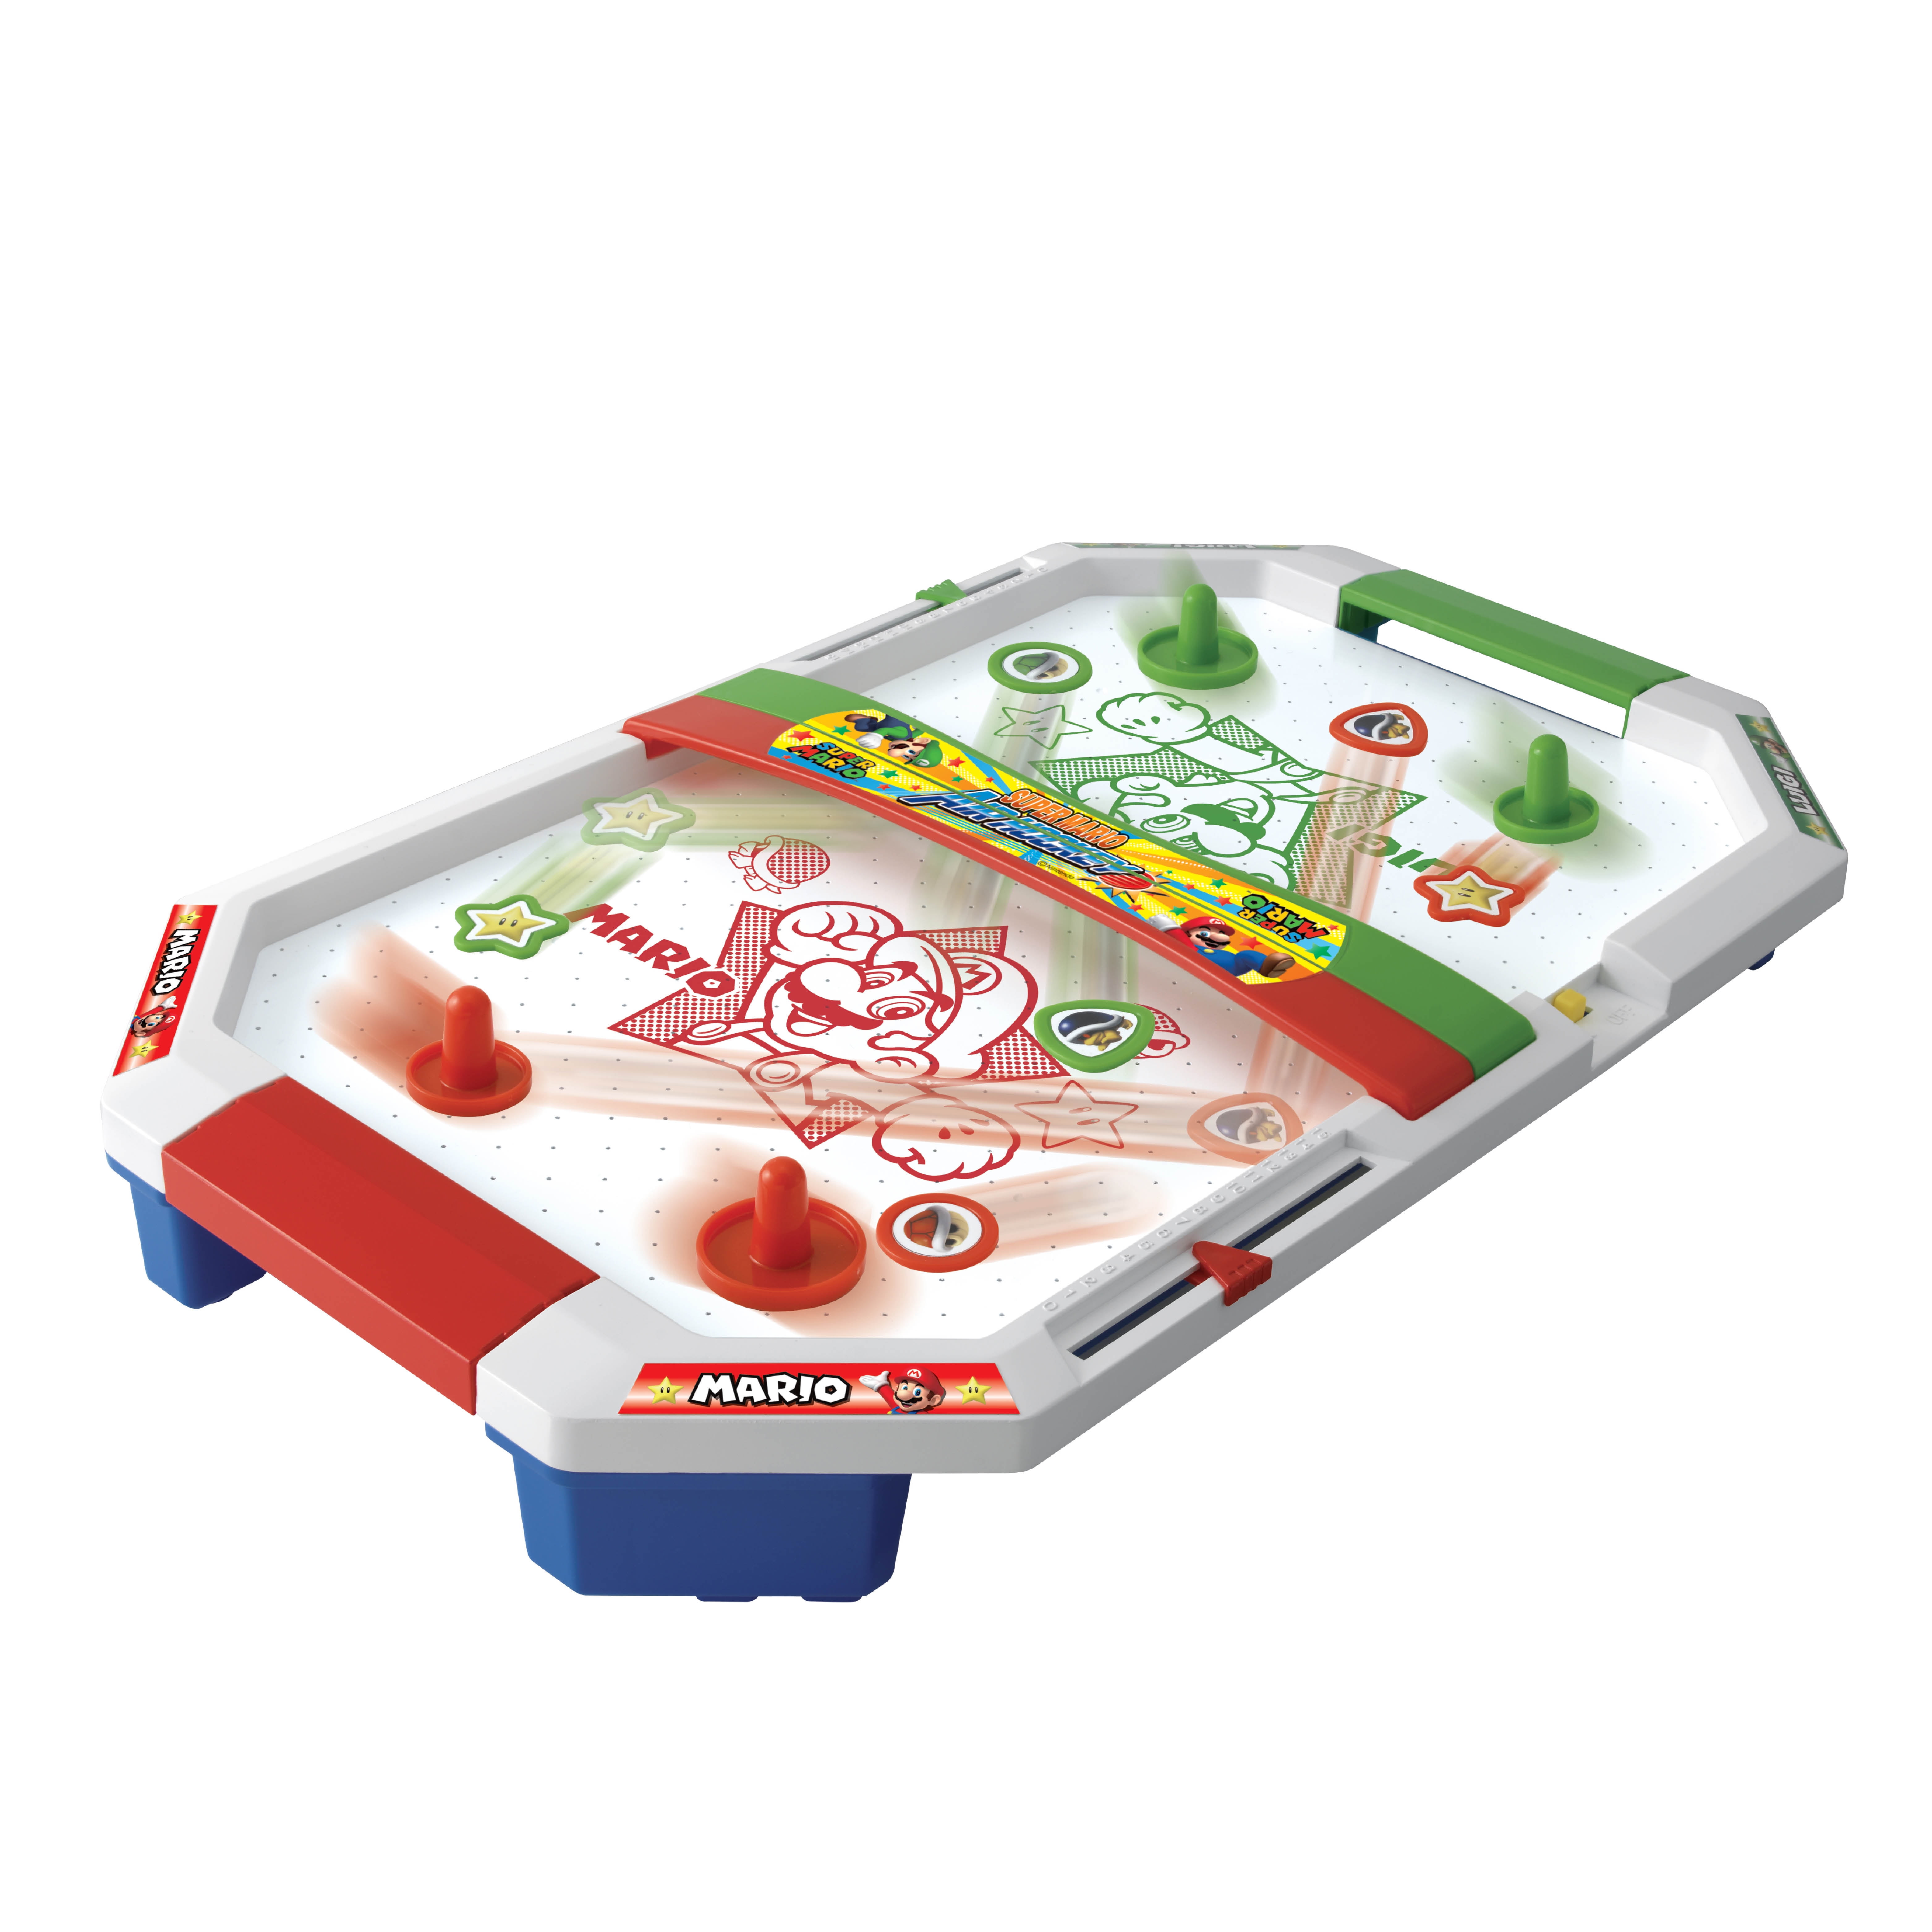 Epoch Games Super Mario Air Hockey, Tabletop Skill and Action Game with Collectible Super Mario Action Figures